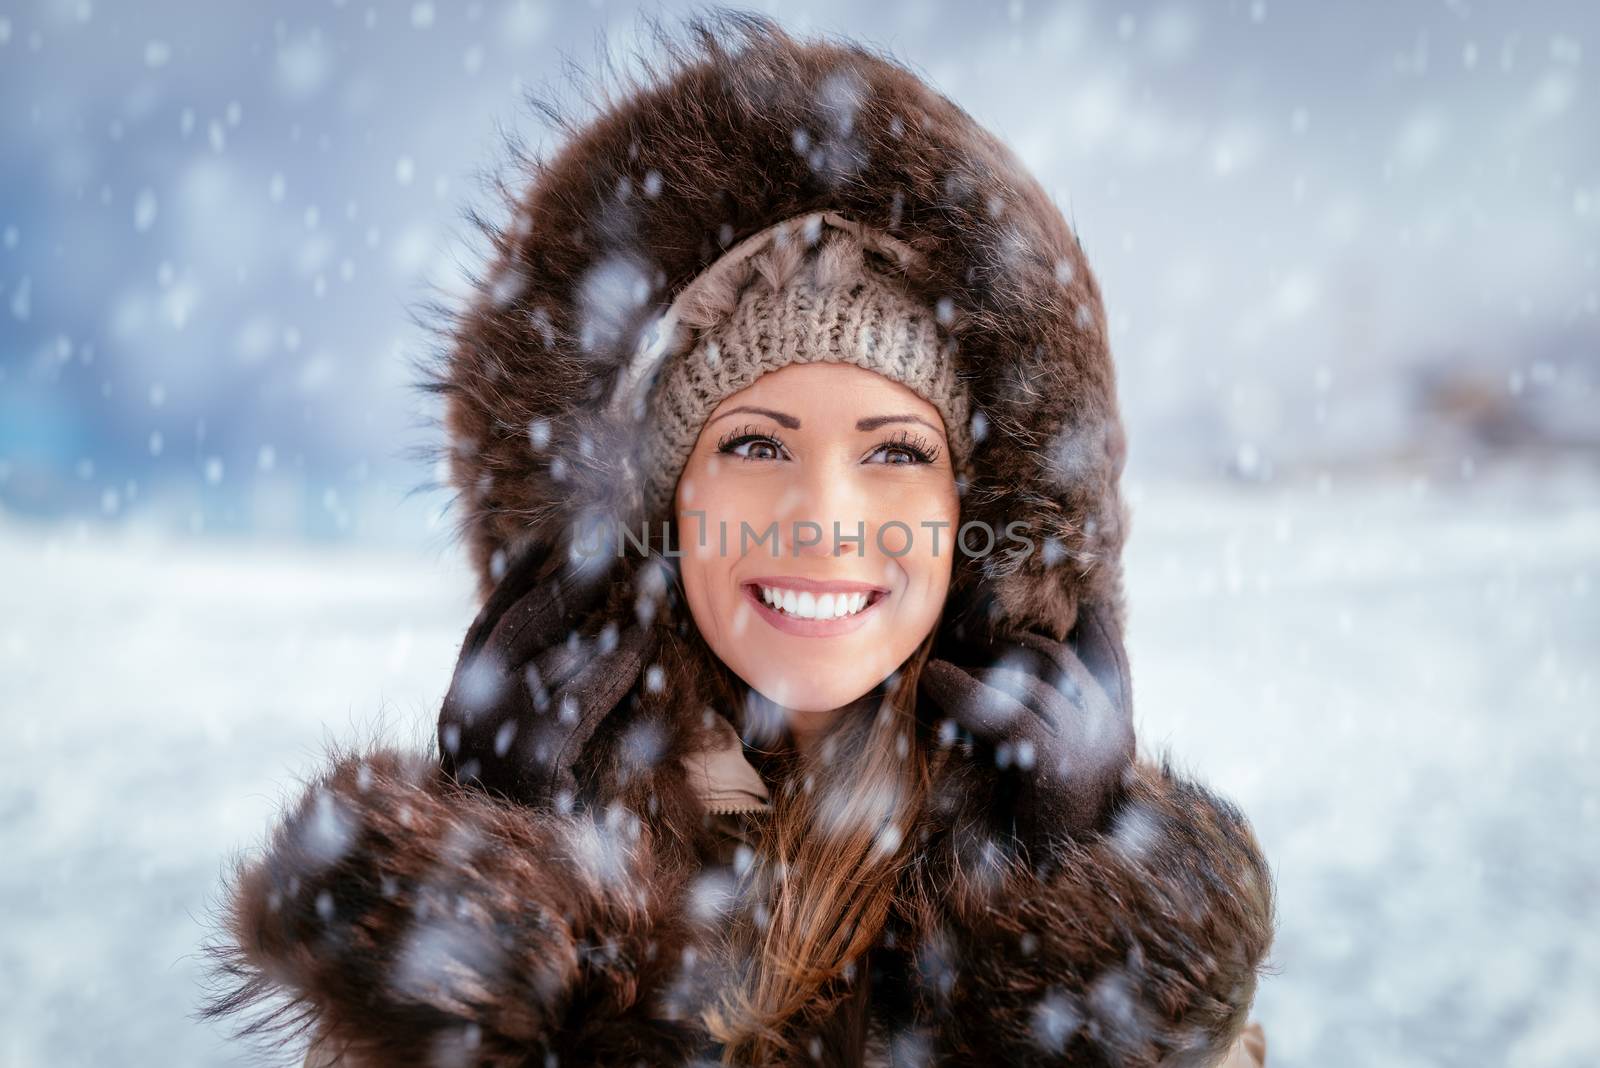 Portrait of a beautiful smiling girl outdoors while its snowing.